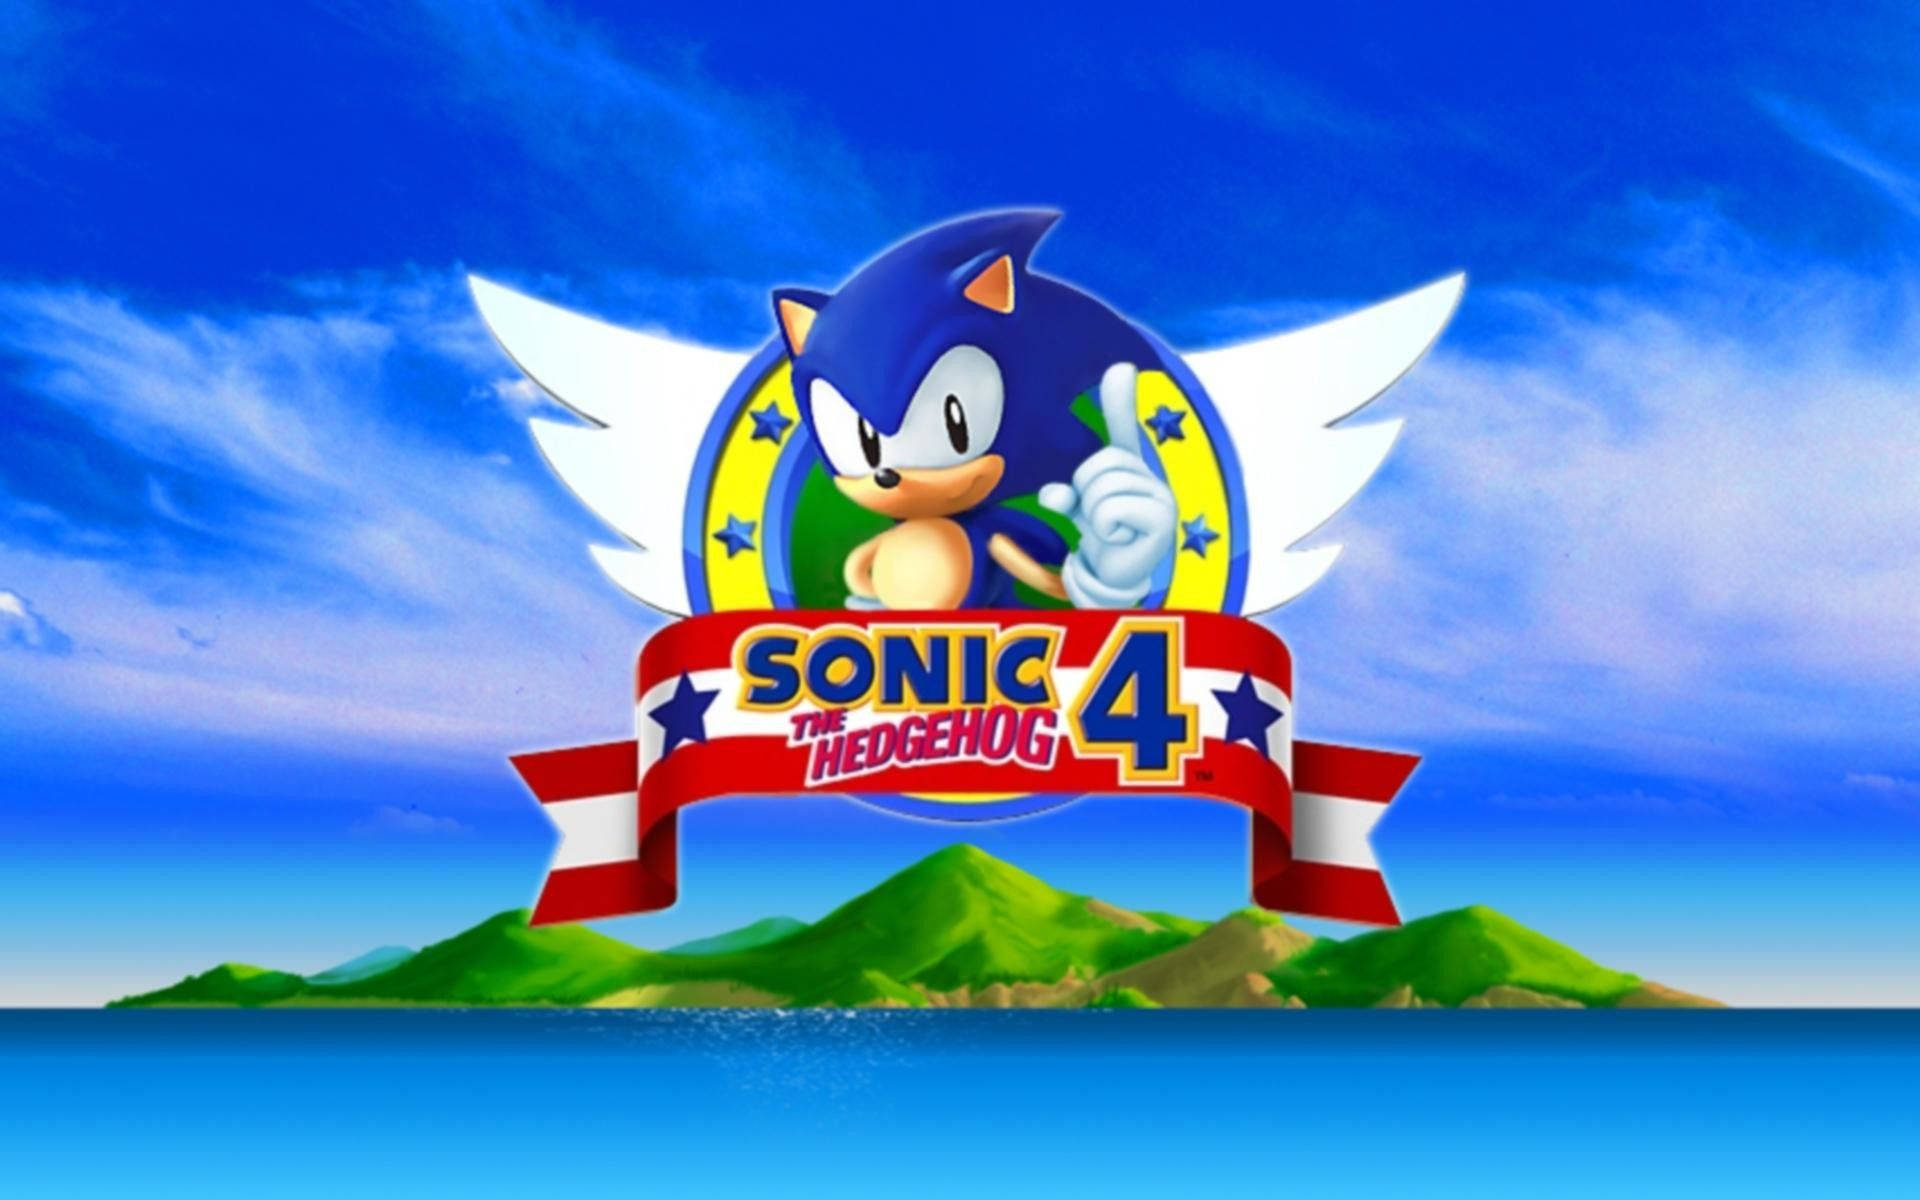 Sonic The Hedgehog 4 Game Hd Cover